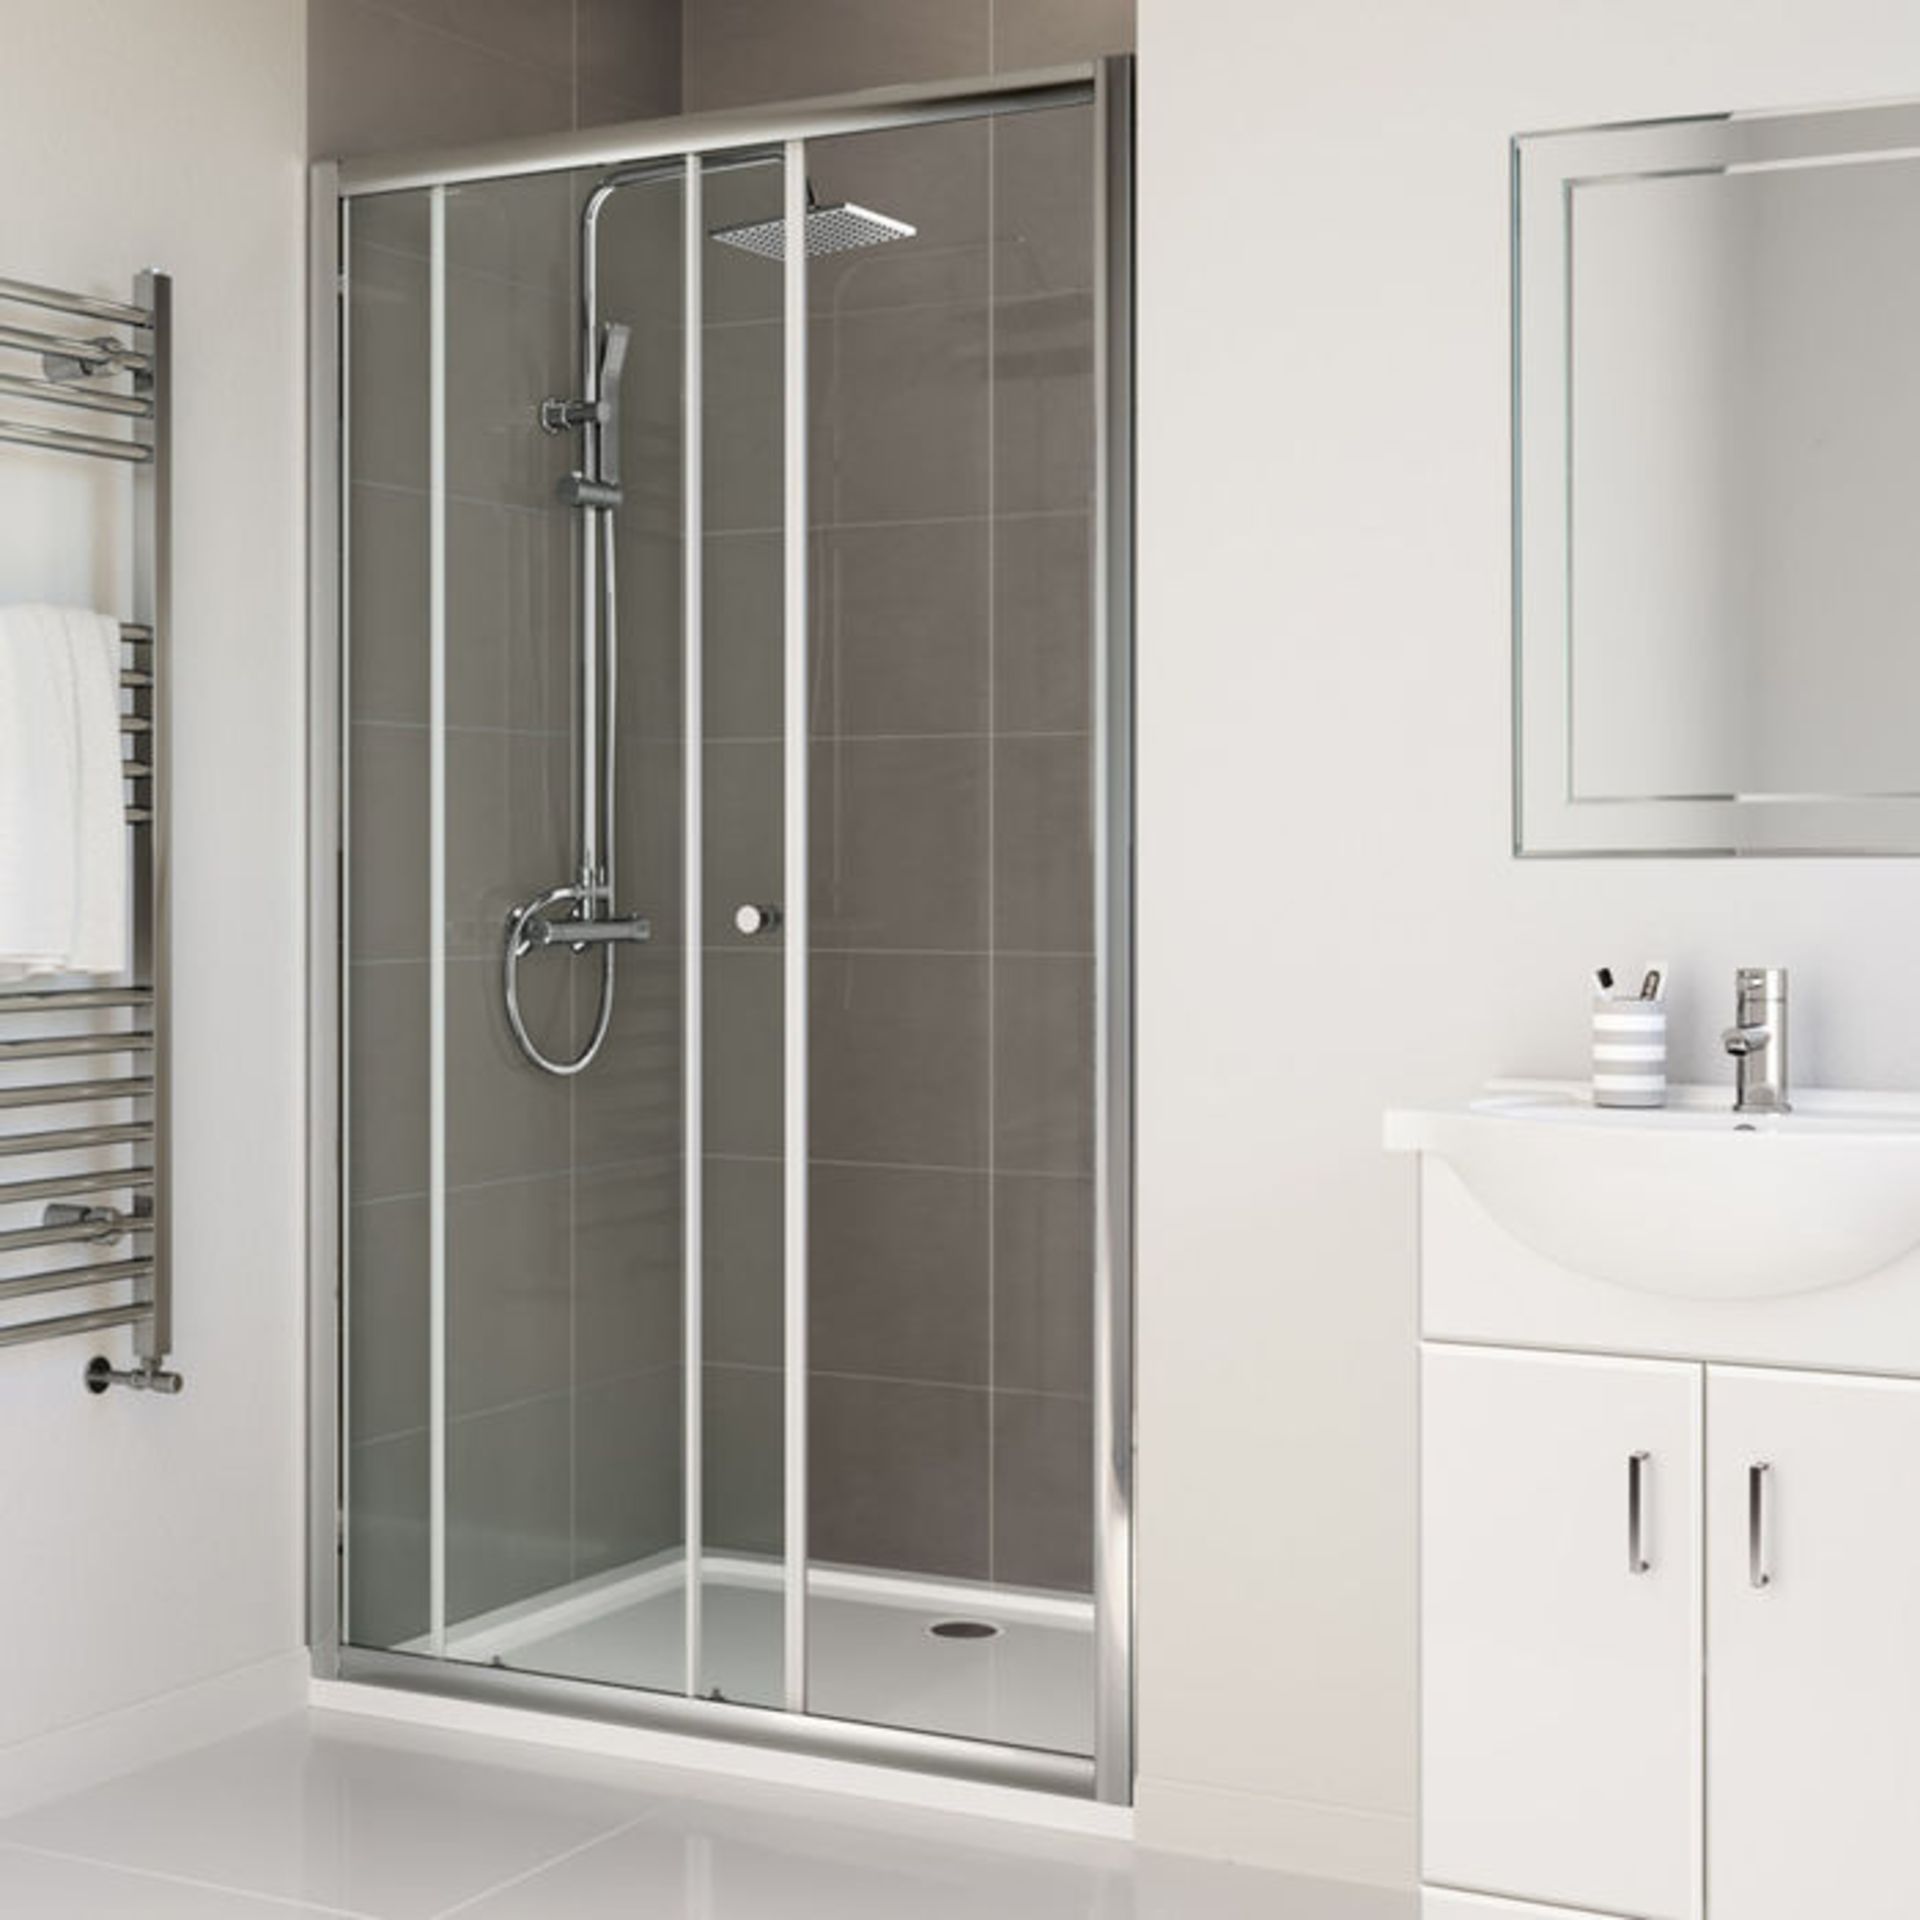 (DK155) 1000mm - Elements Sliding Shower Door. RRP £299.99. 4mm Safety Glass Fully waterproof tested - Image 2 of 4